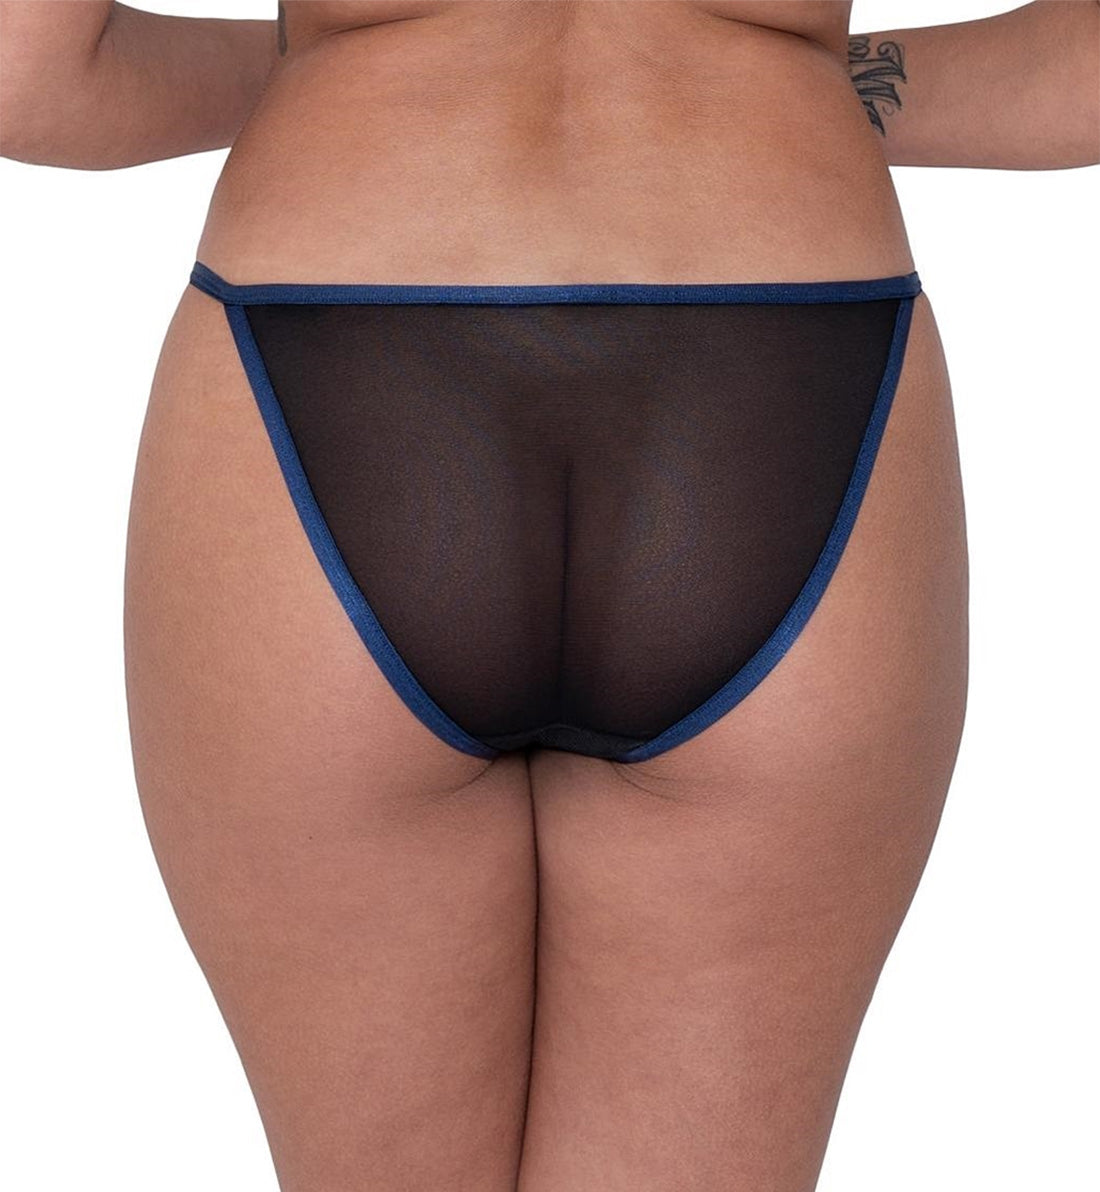 Scantilly by Curvy Kate Submission Brief  (ST009216),Small,Black/Blue - Black/Blue,Small